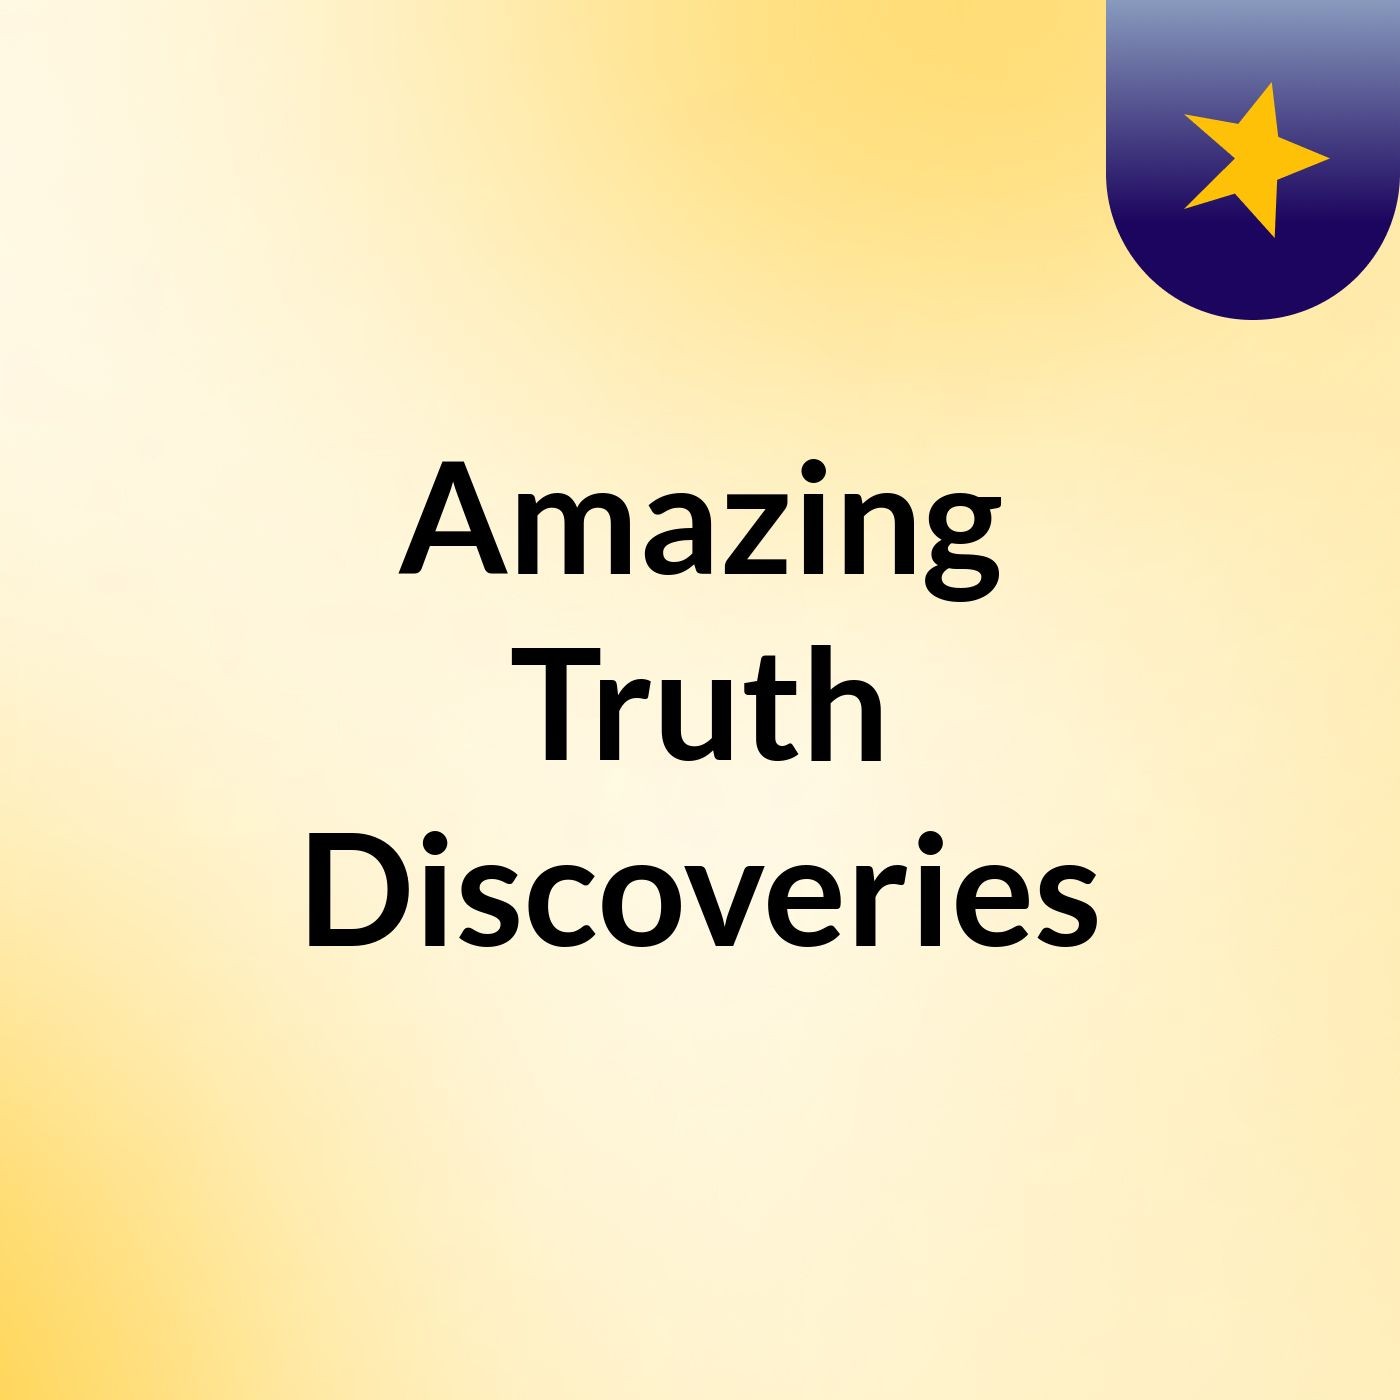 Amazing Truth Discoveries